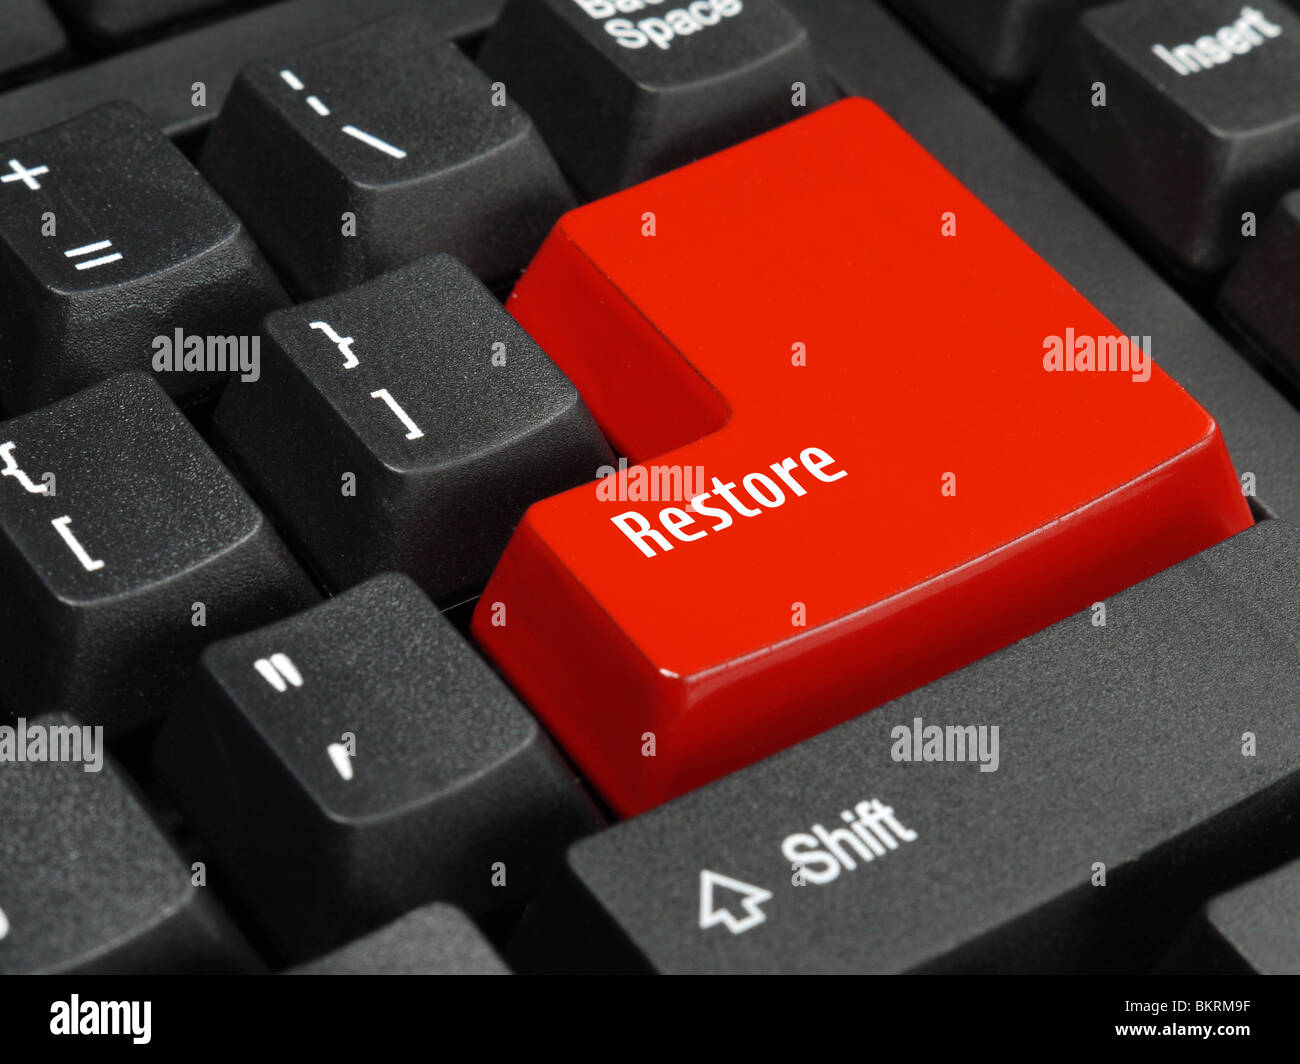 Closeup of computer keyboard key in red color spelling Restore Stock Photo